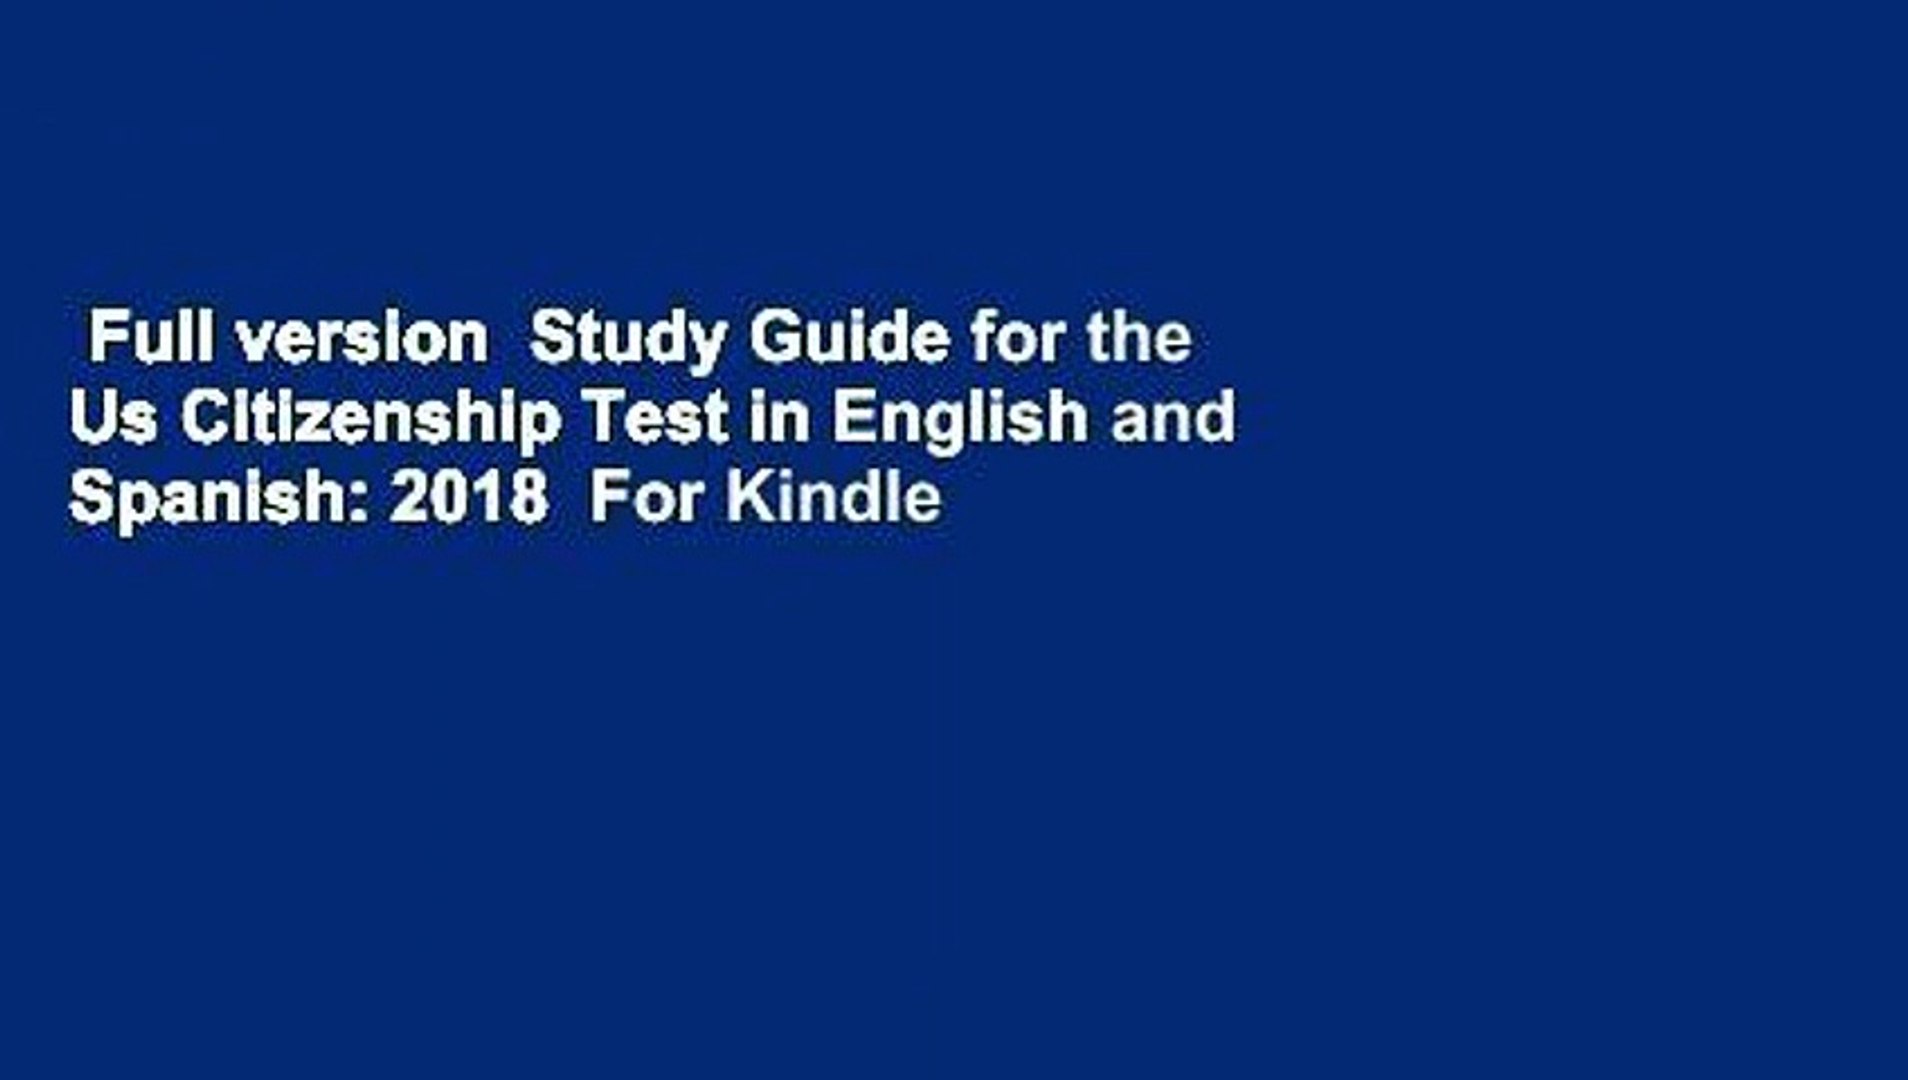 Full version  Study Guide for the Us Citizenship Test in English and Spanish: 2018  For Kindle